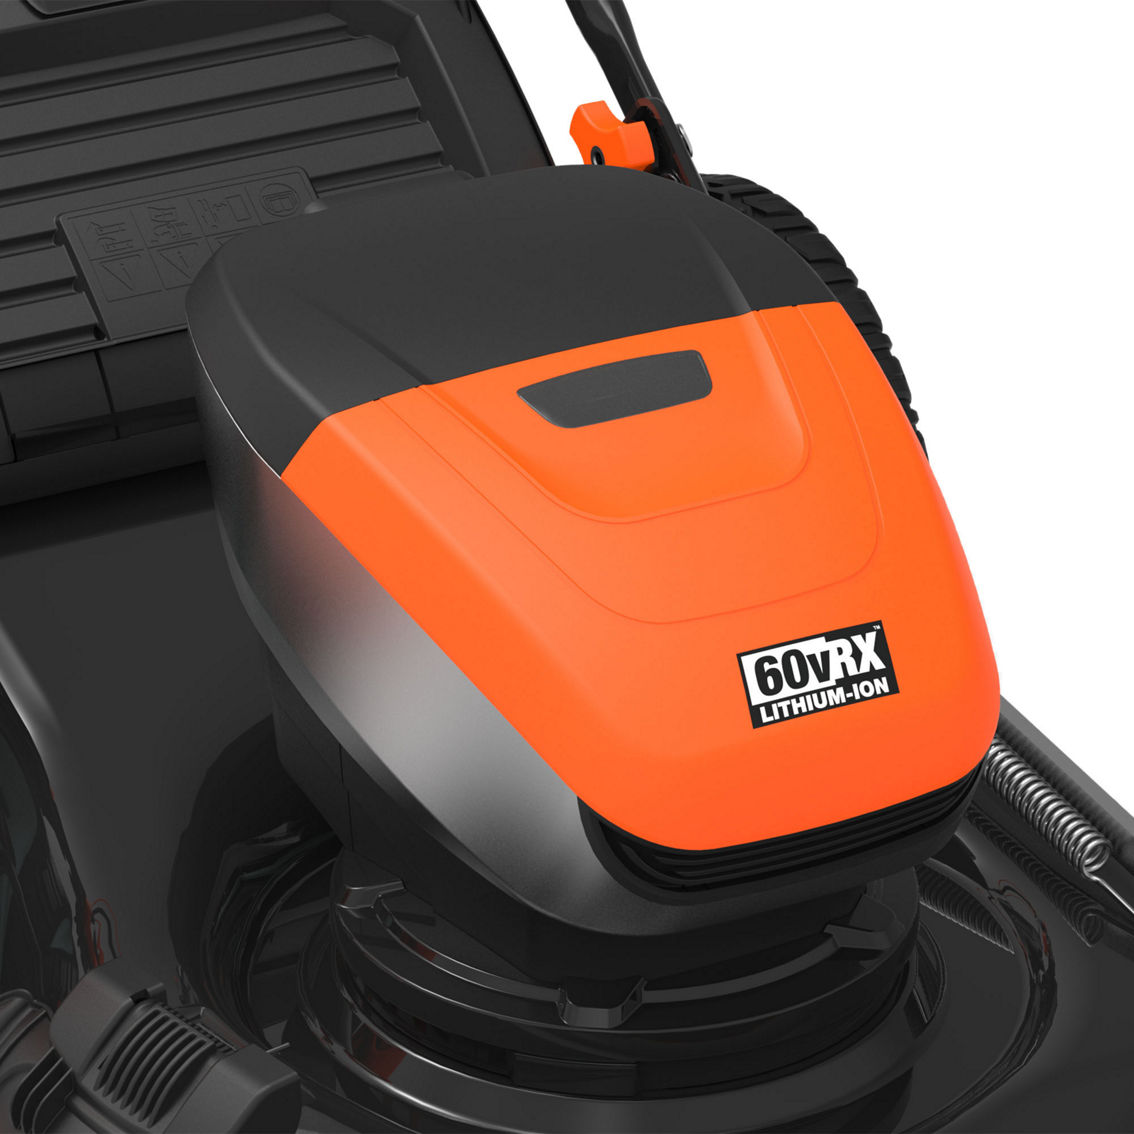 YARD FORCE 20-Volt XTRA High Performance Lithium-Ion Battery Pack